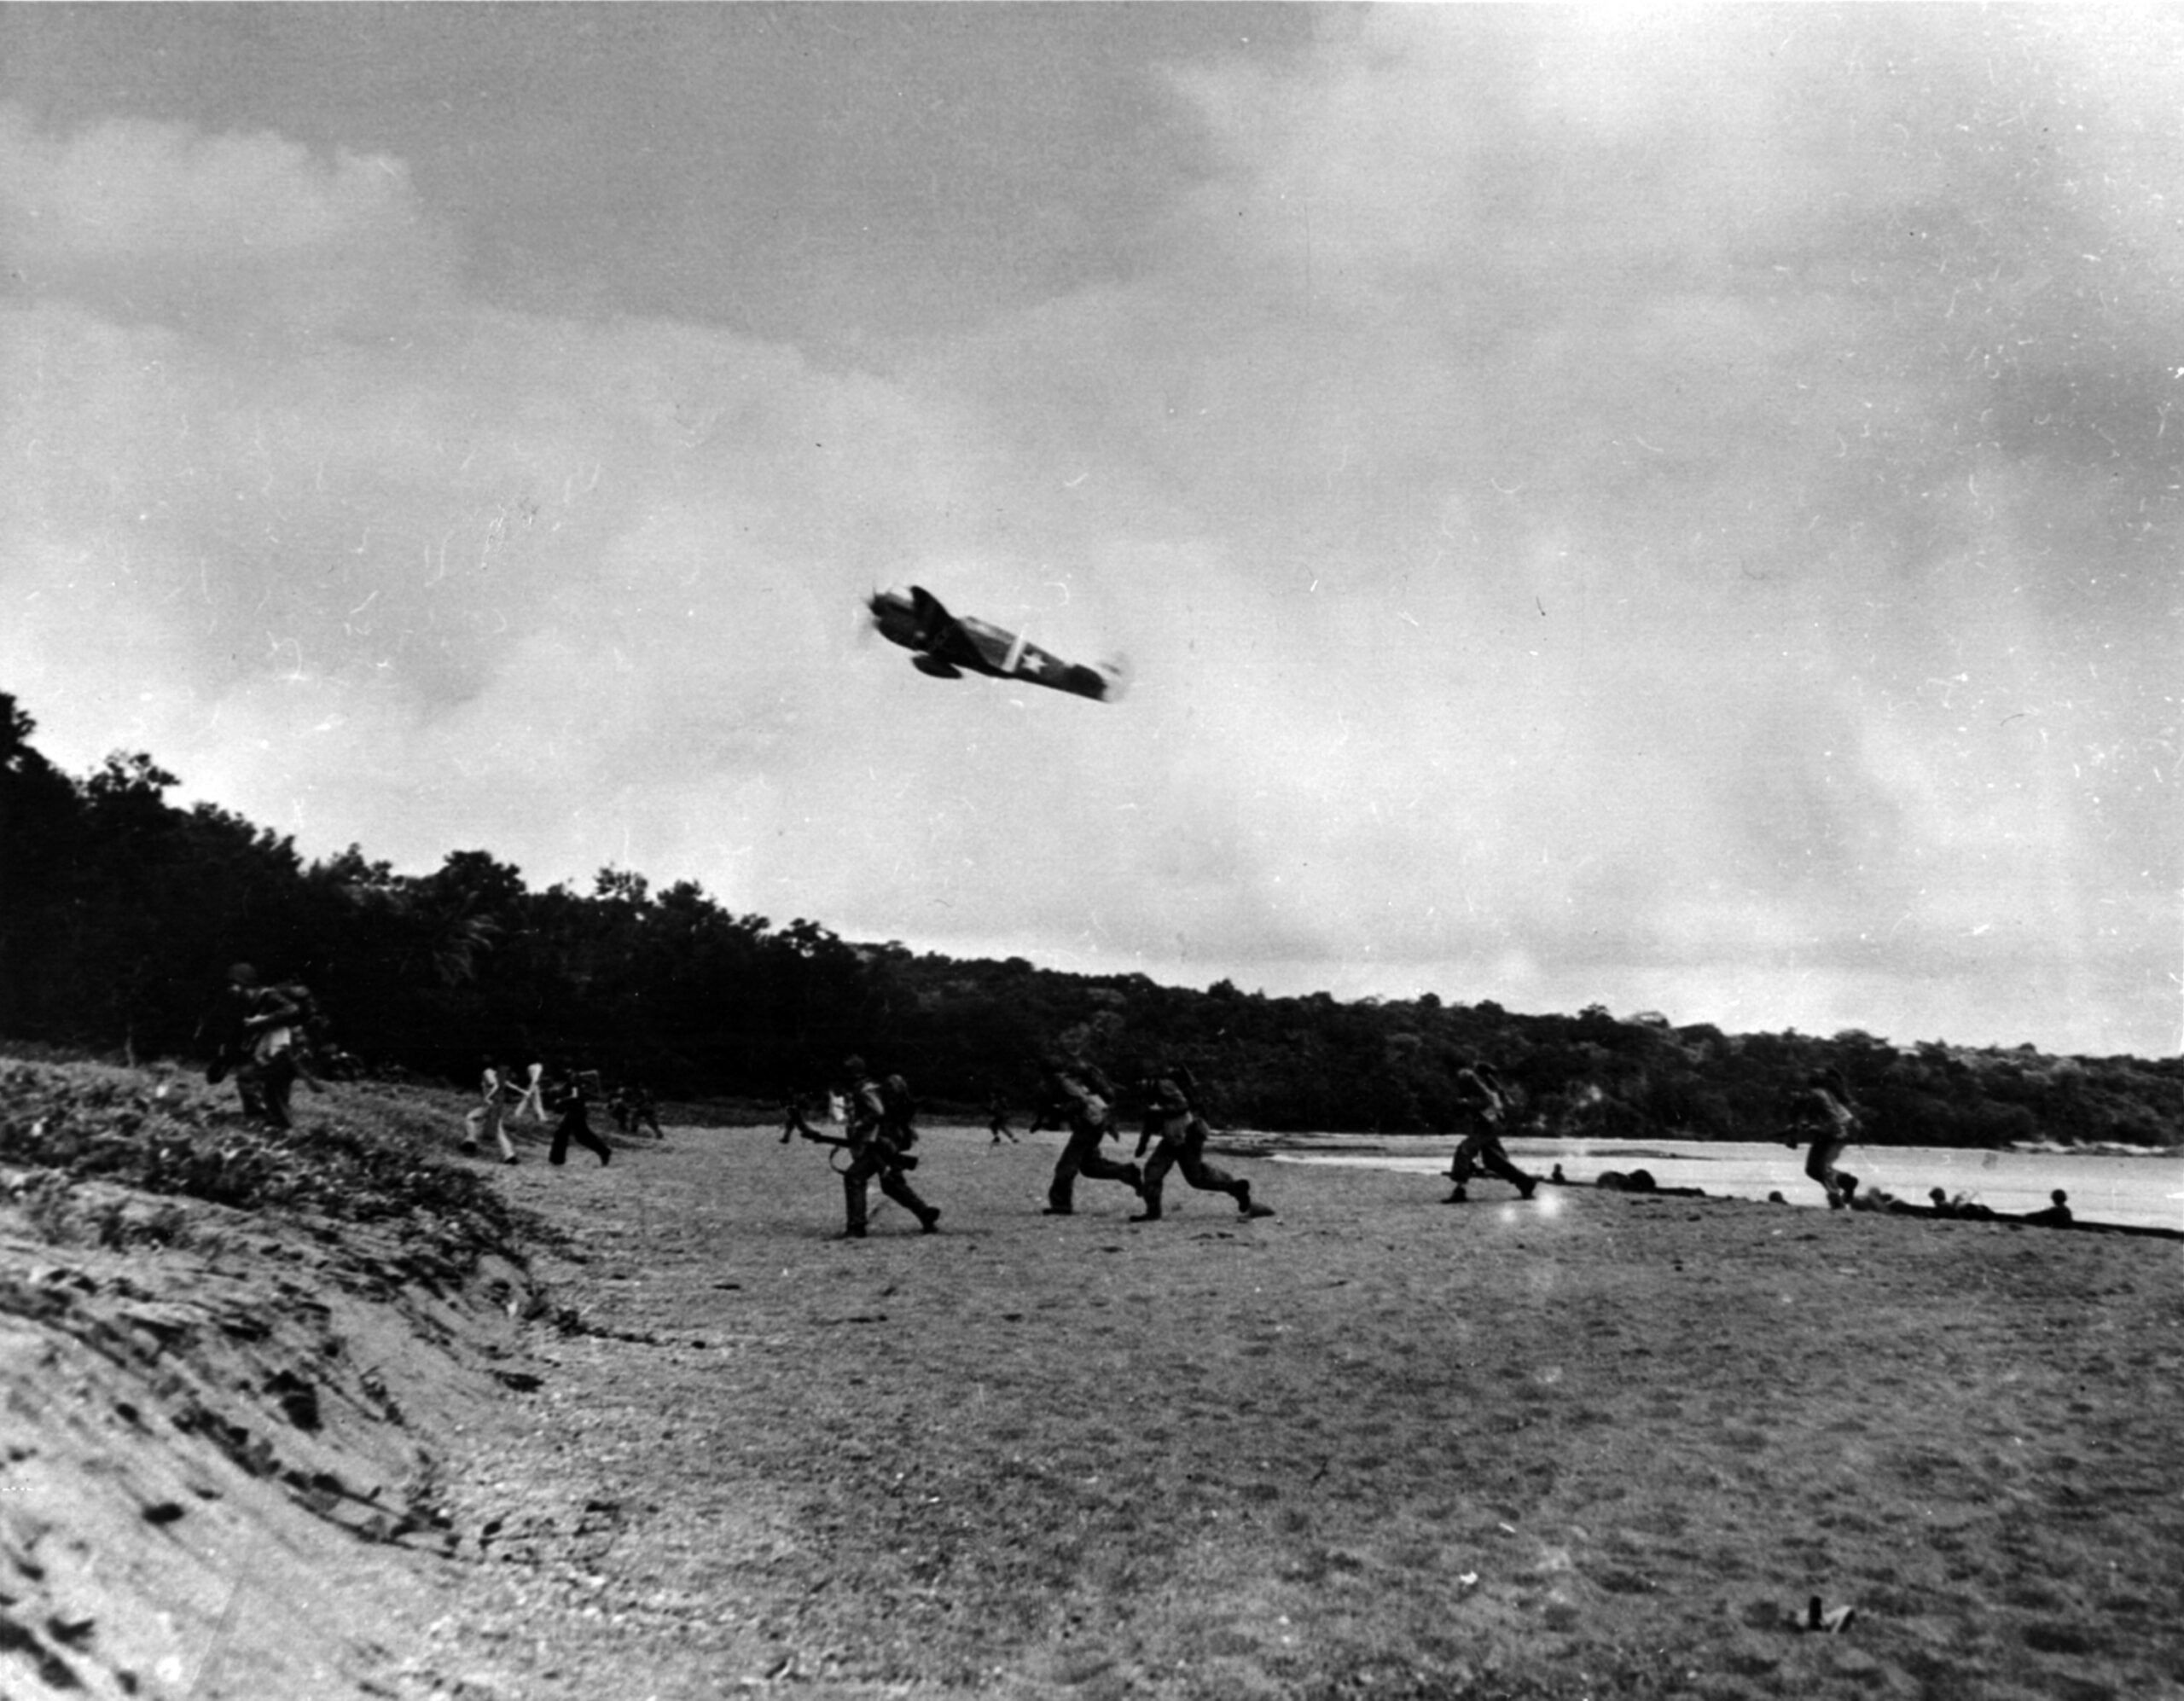 Providing aircover for troops landing at Rendova, a P-40 Tomahawk fighter sweeps low over the invasion beach. 